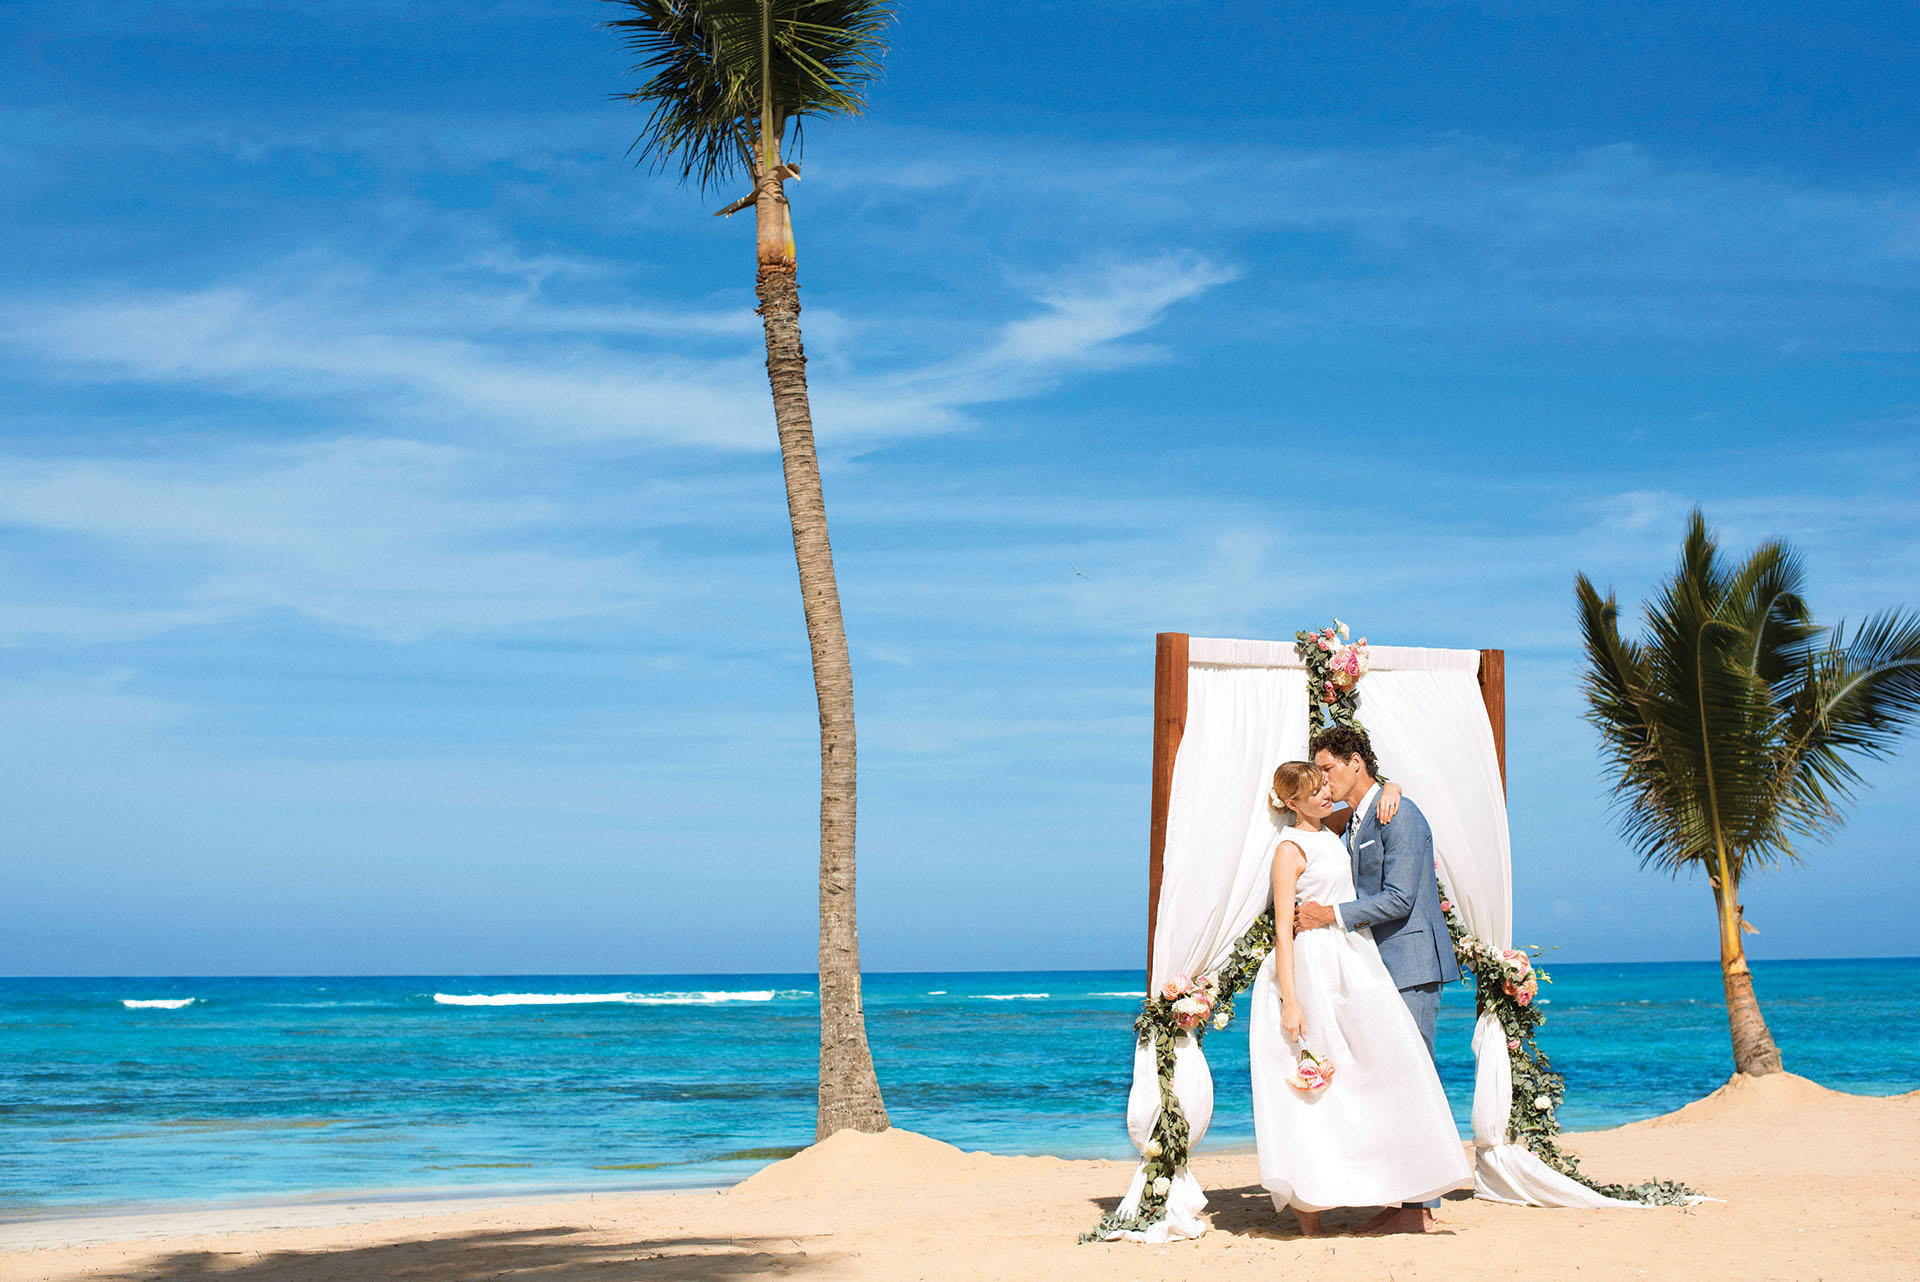 Tropical ambiance for a beach wedding in an All Inclusive resort